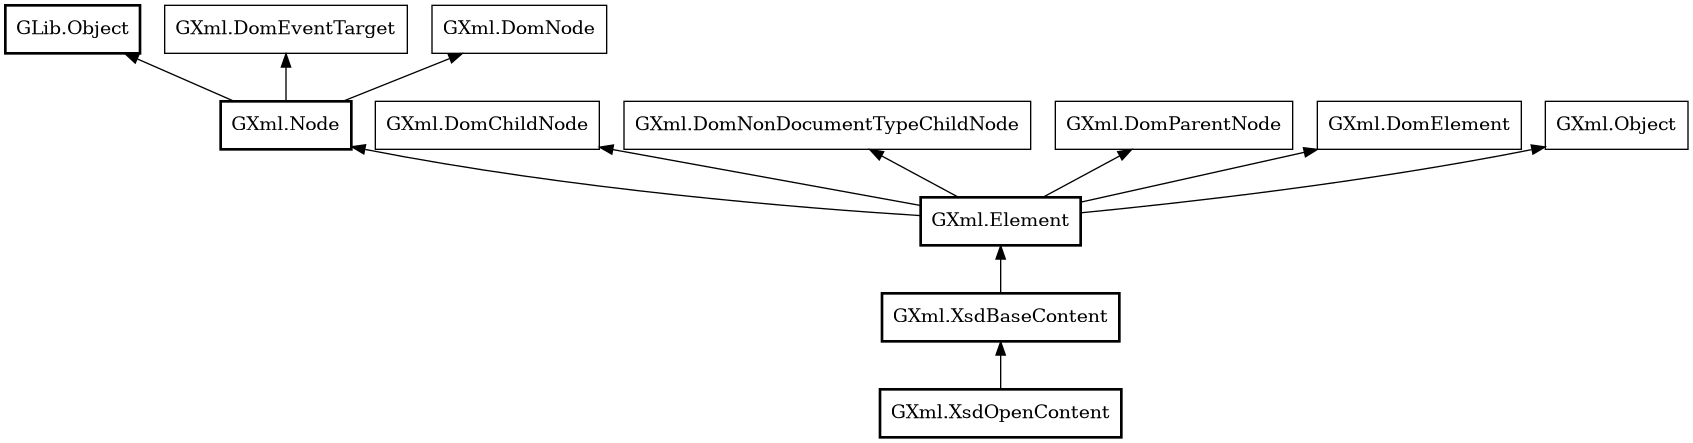 Object hierarchy for XsdOpenContent